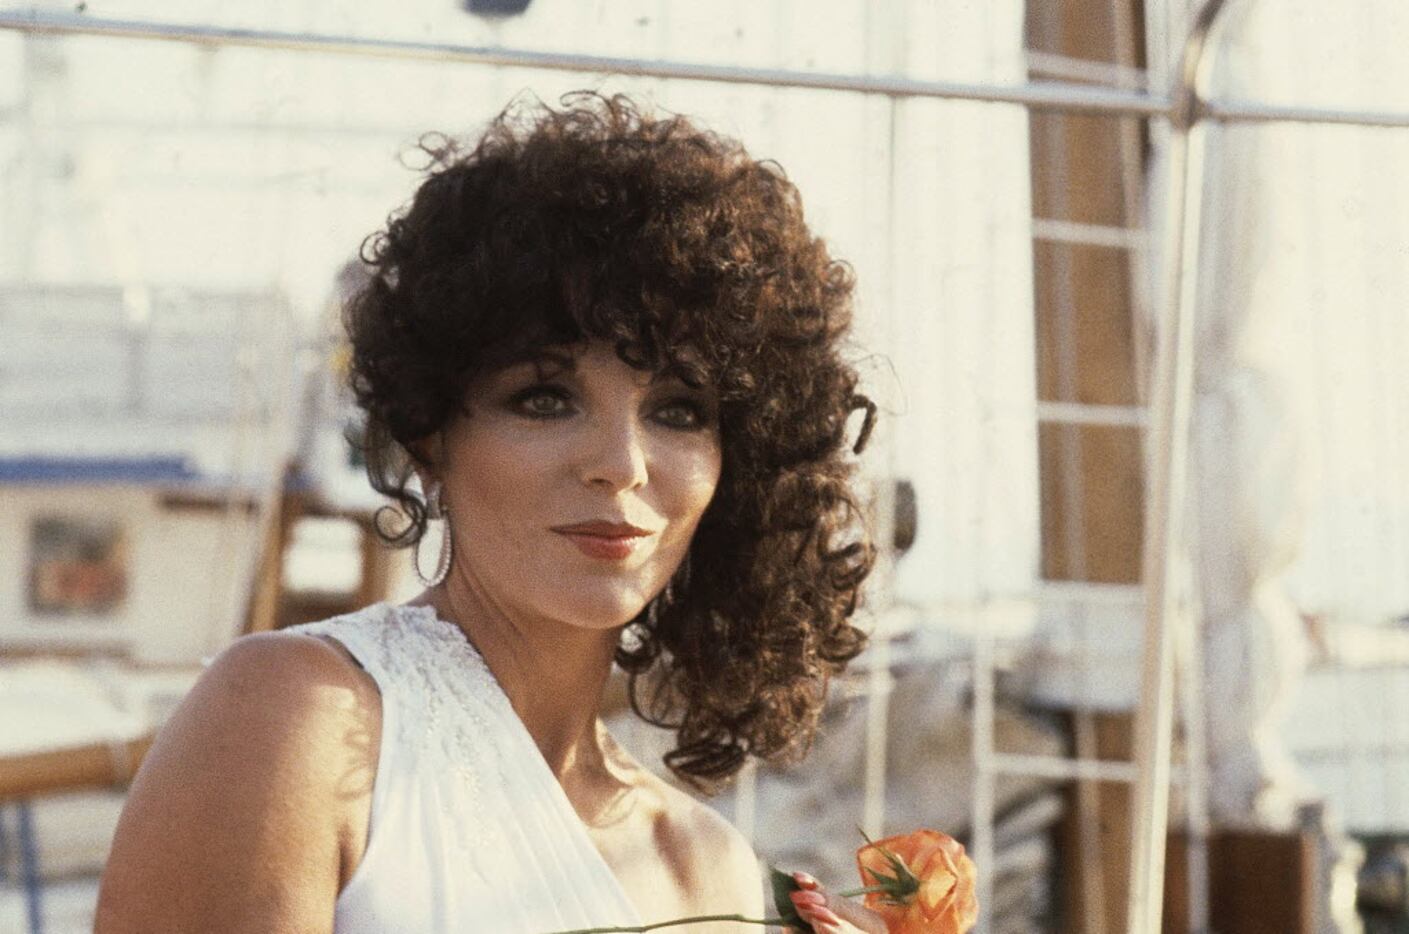 No doubt about it, British actress Joan Collins' curly tresses are not natural.